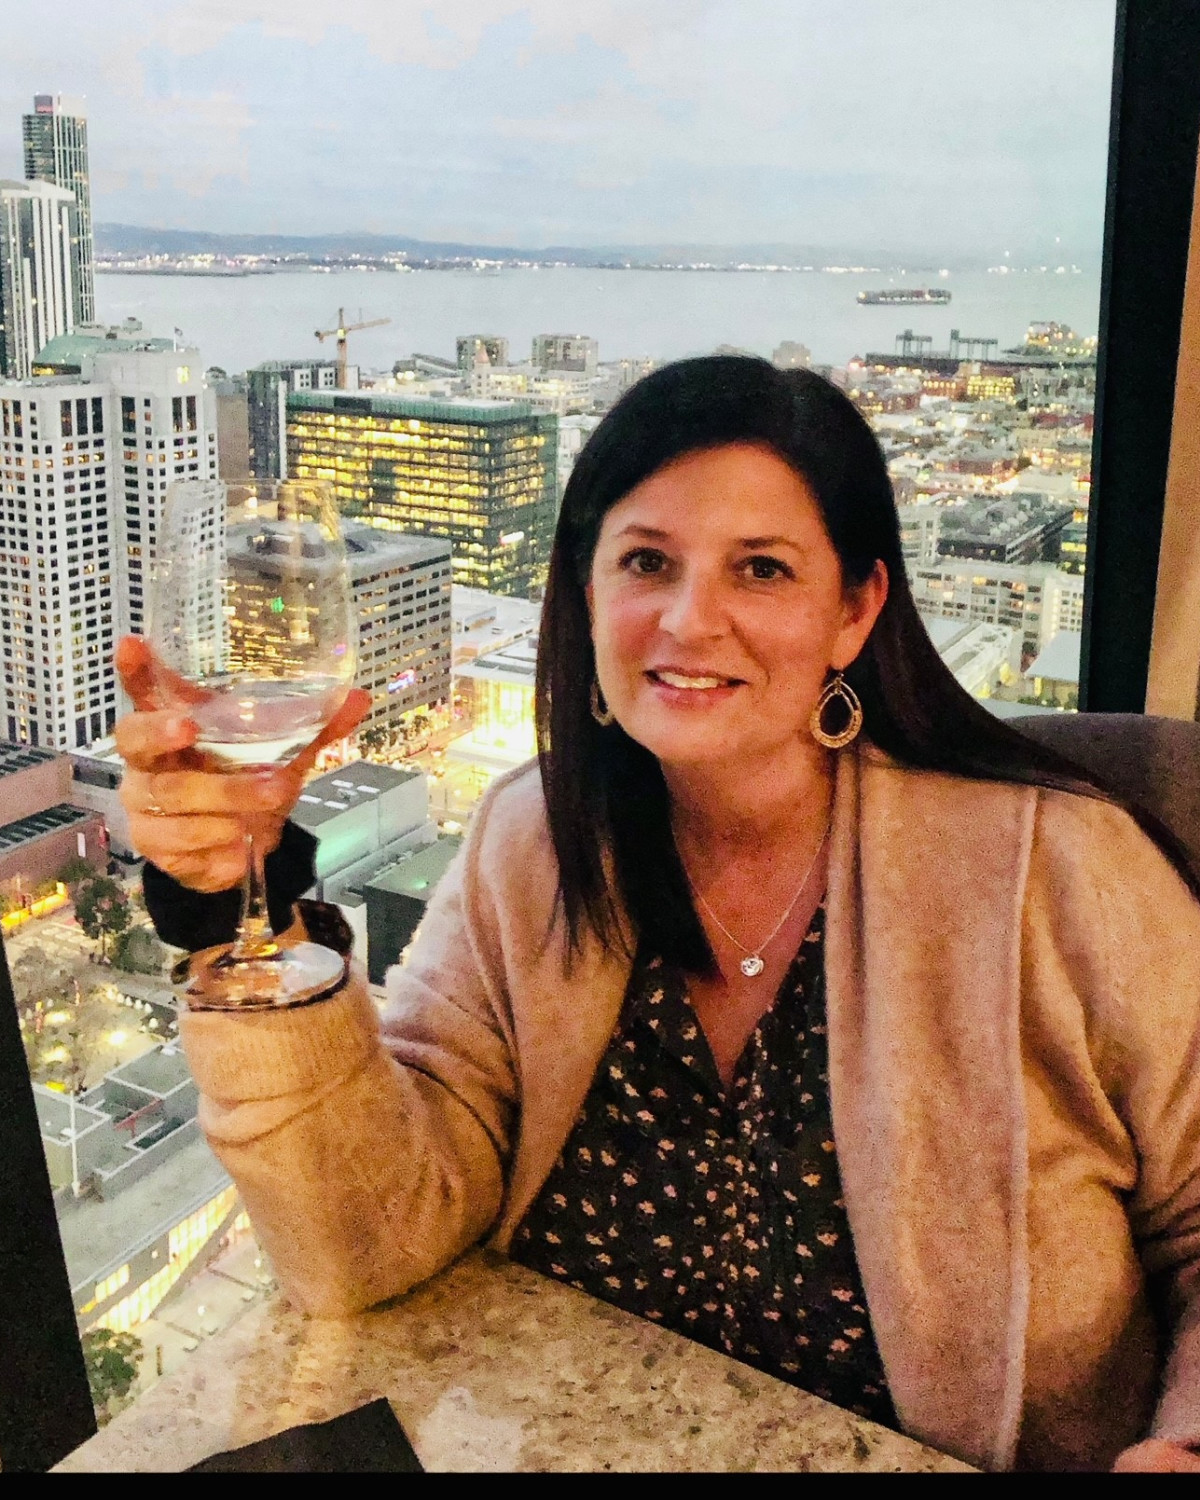 a woman holds a wine glass in a restaurant overlooking a city